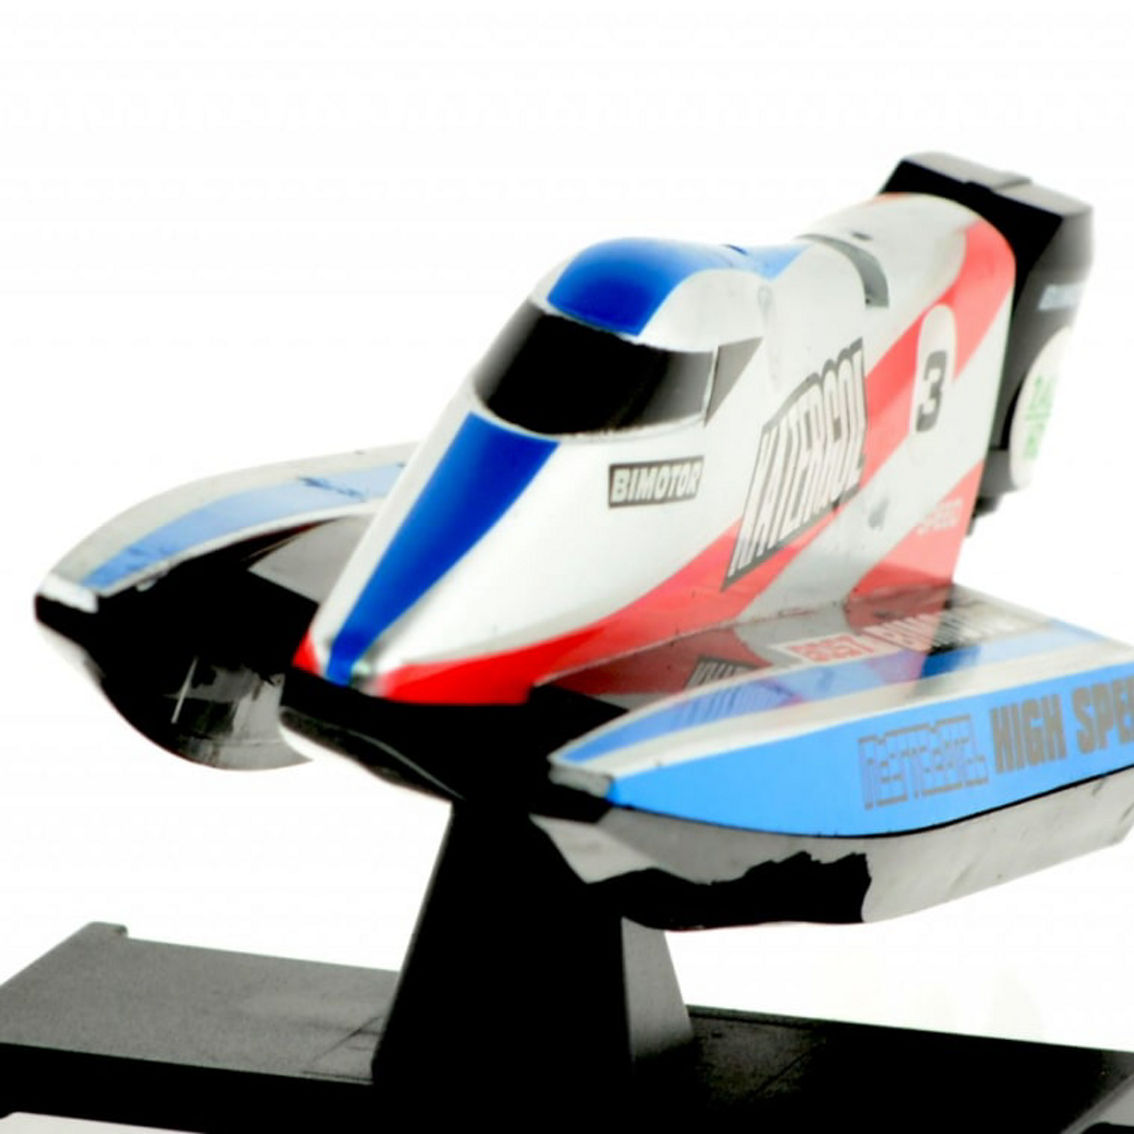 CIS-3313M-O Micro 2.4 Ghz Formula 1 speed boat with decals 2 colors Red and Blue - Image 4 of 5